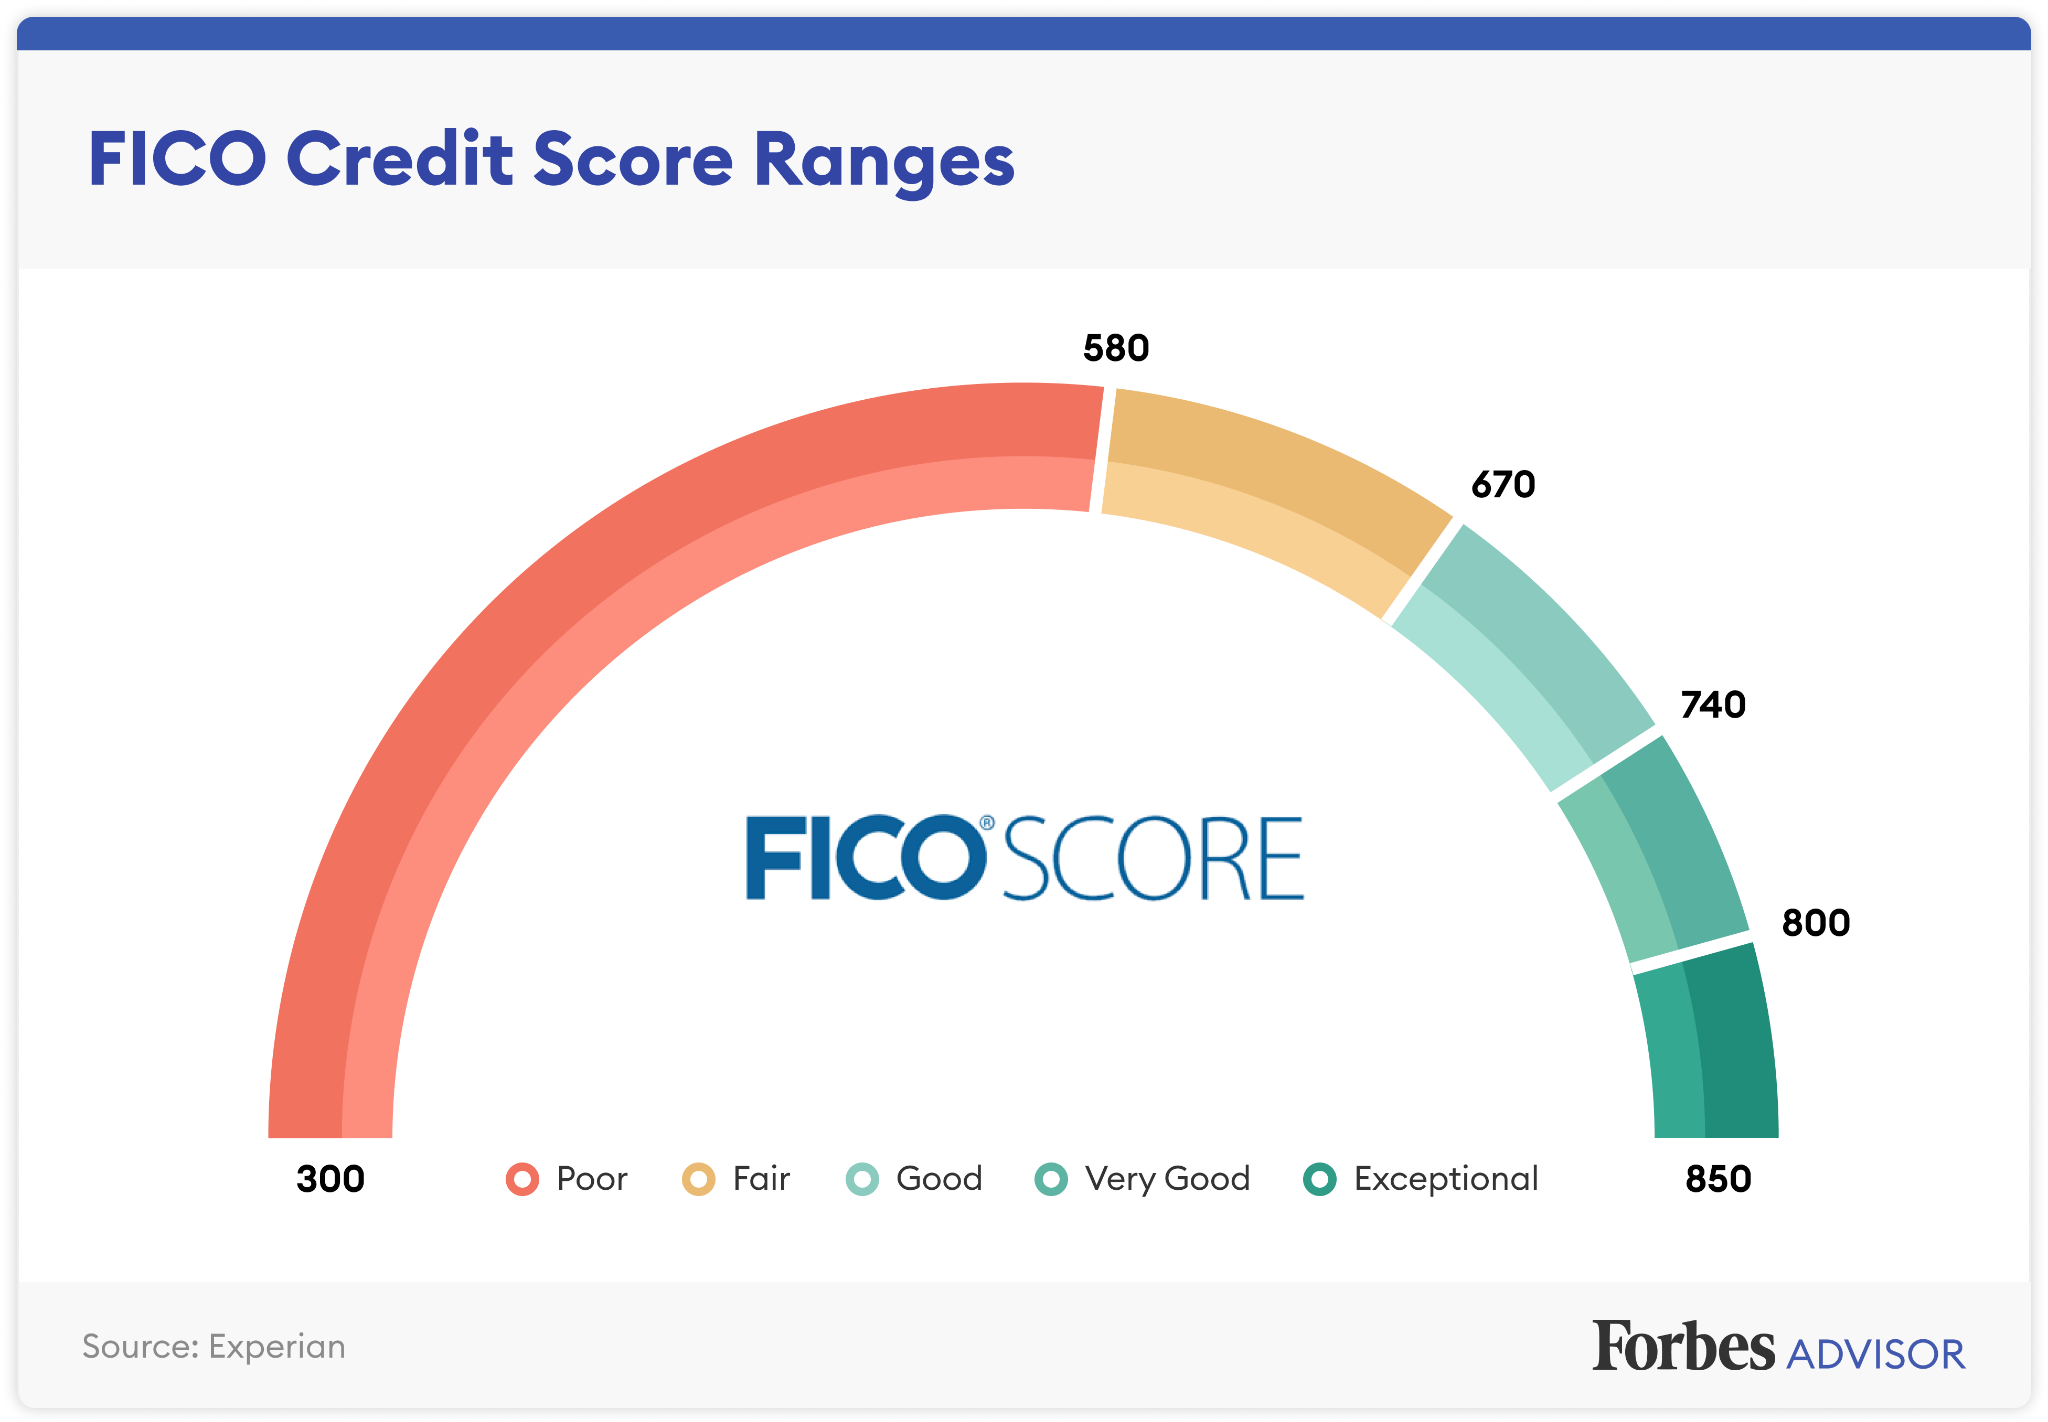 What Is A Good Or Average Credit Score?